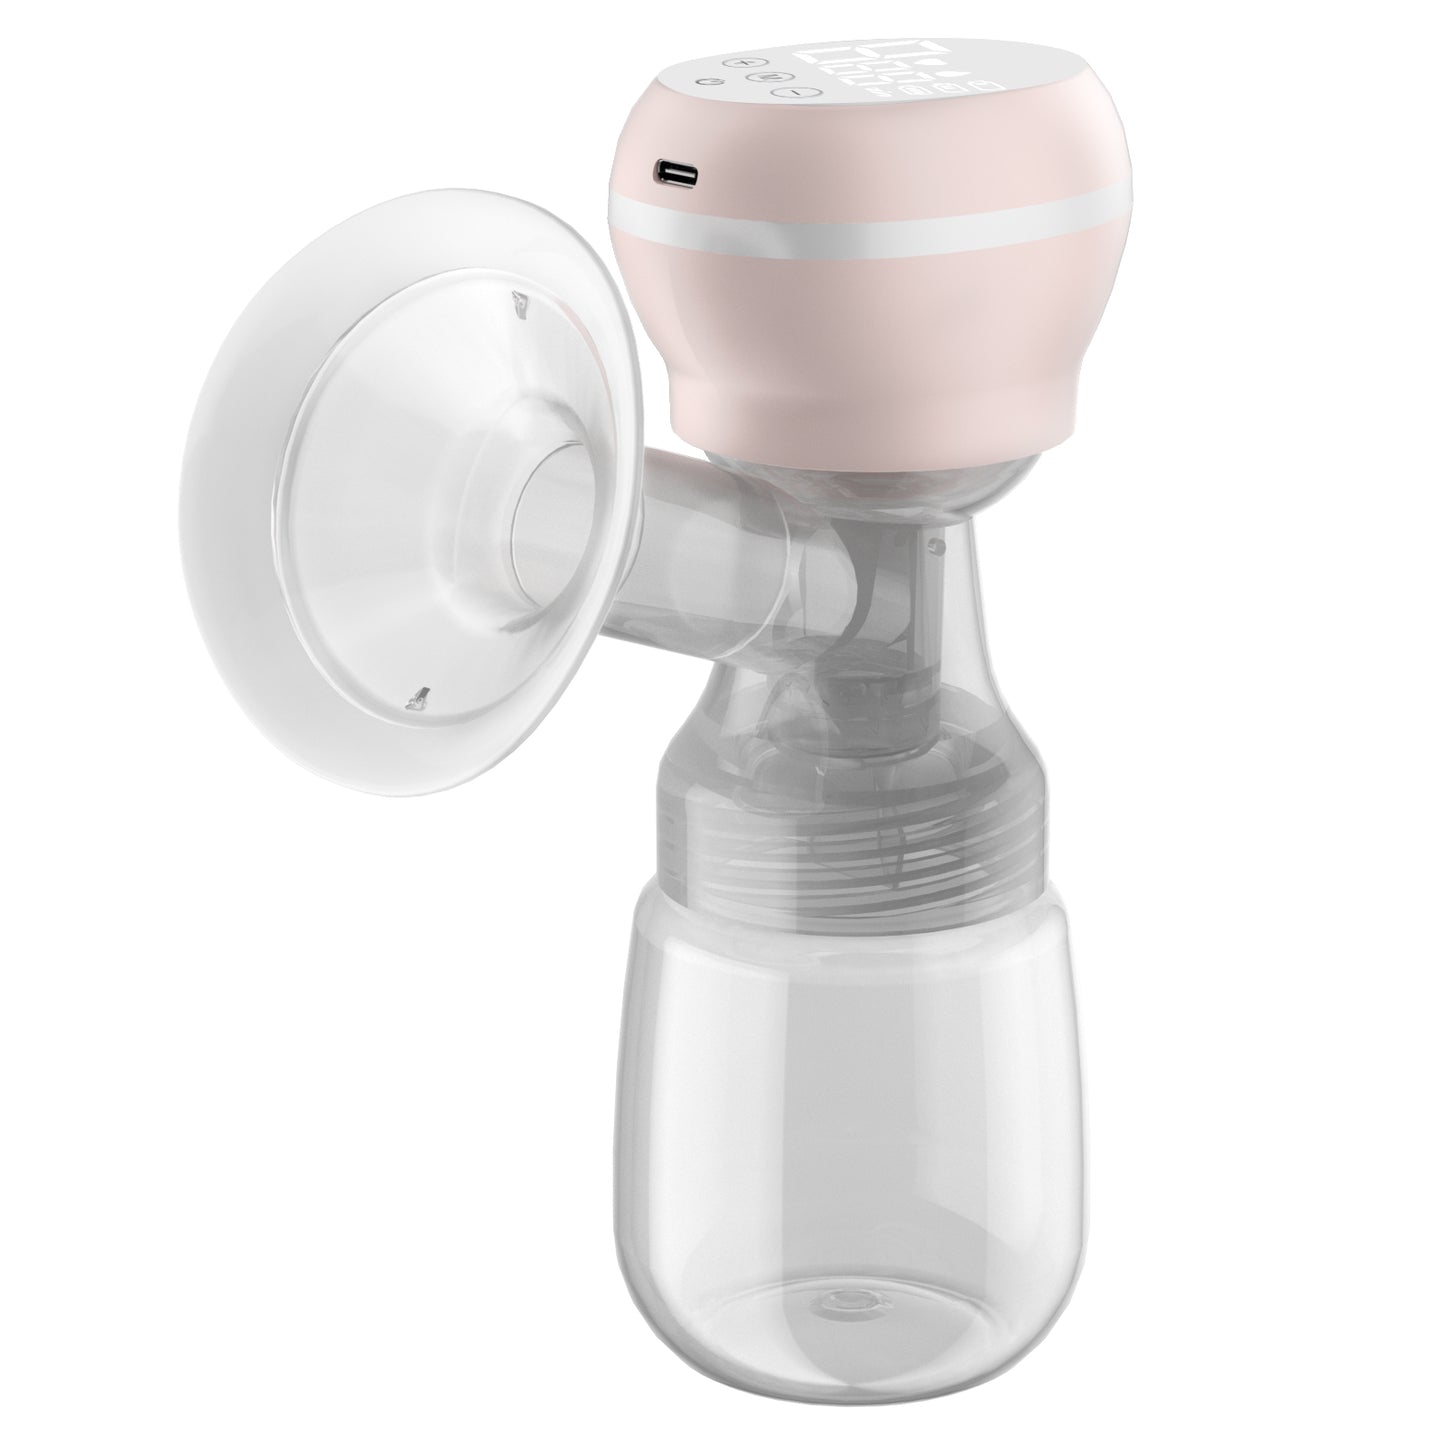 Portable Hands-Free Electric Breast Pump Household Medical Device Wireless Electric Breast Pump